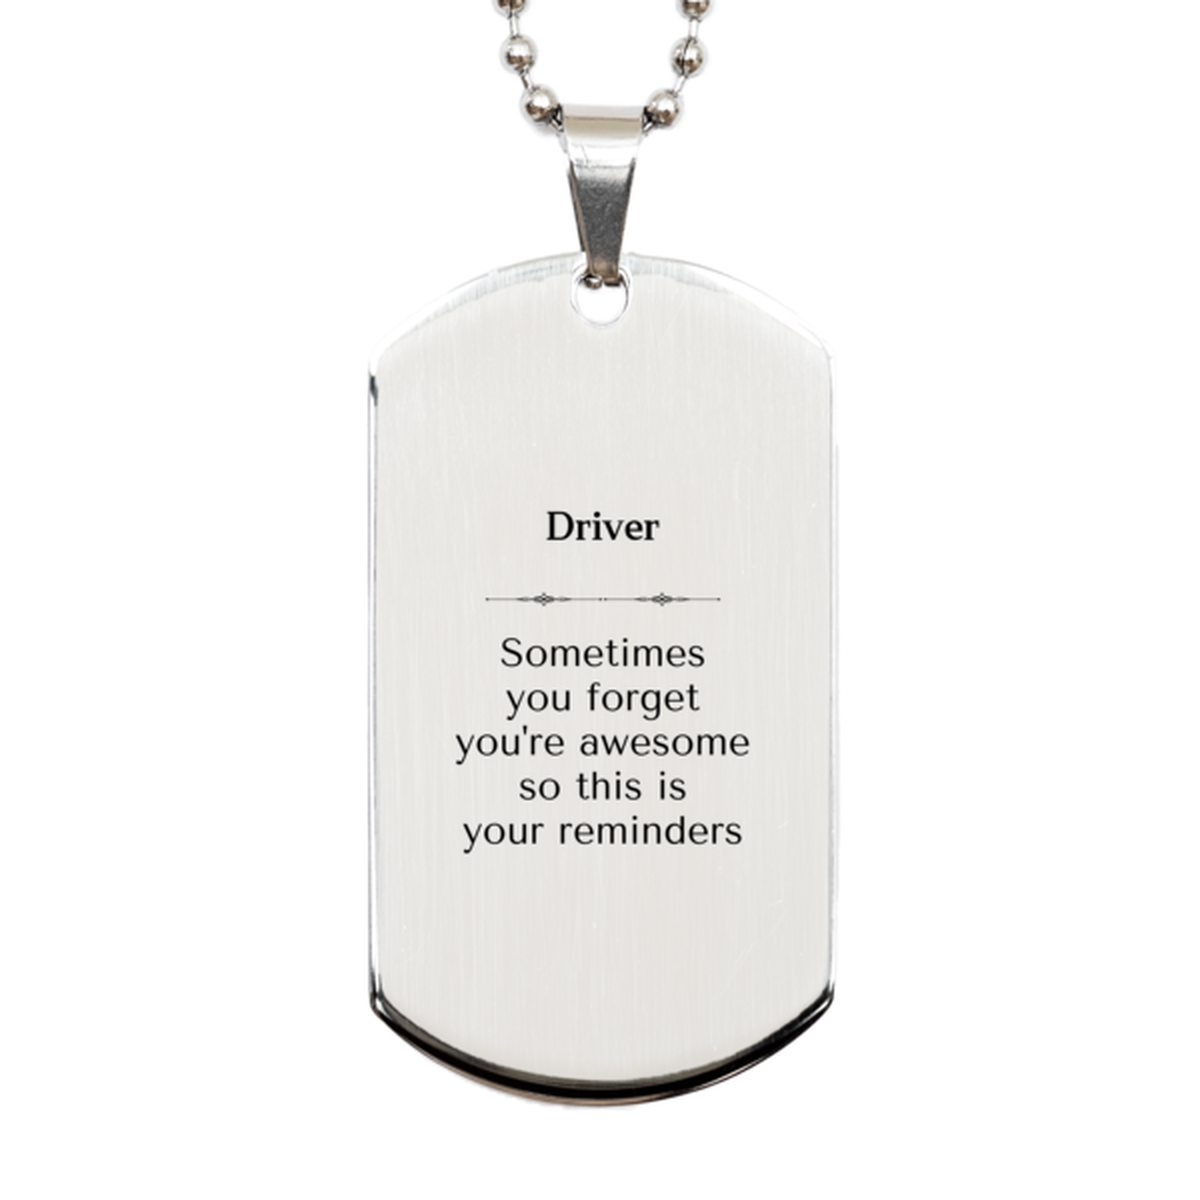 Sentimental Driver Silver Dog Tag, Driver Sometimes you forget you're awesome so this is your reminders, Graduation Christmas Birthday Gifts for Driver, Men, Women, Coworkers